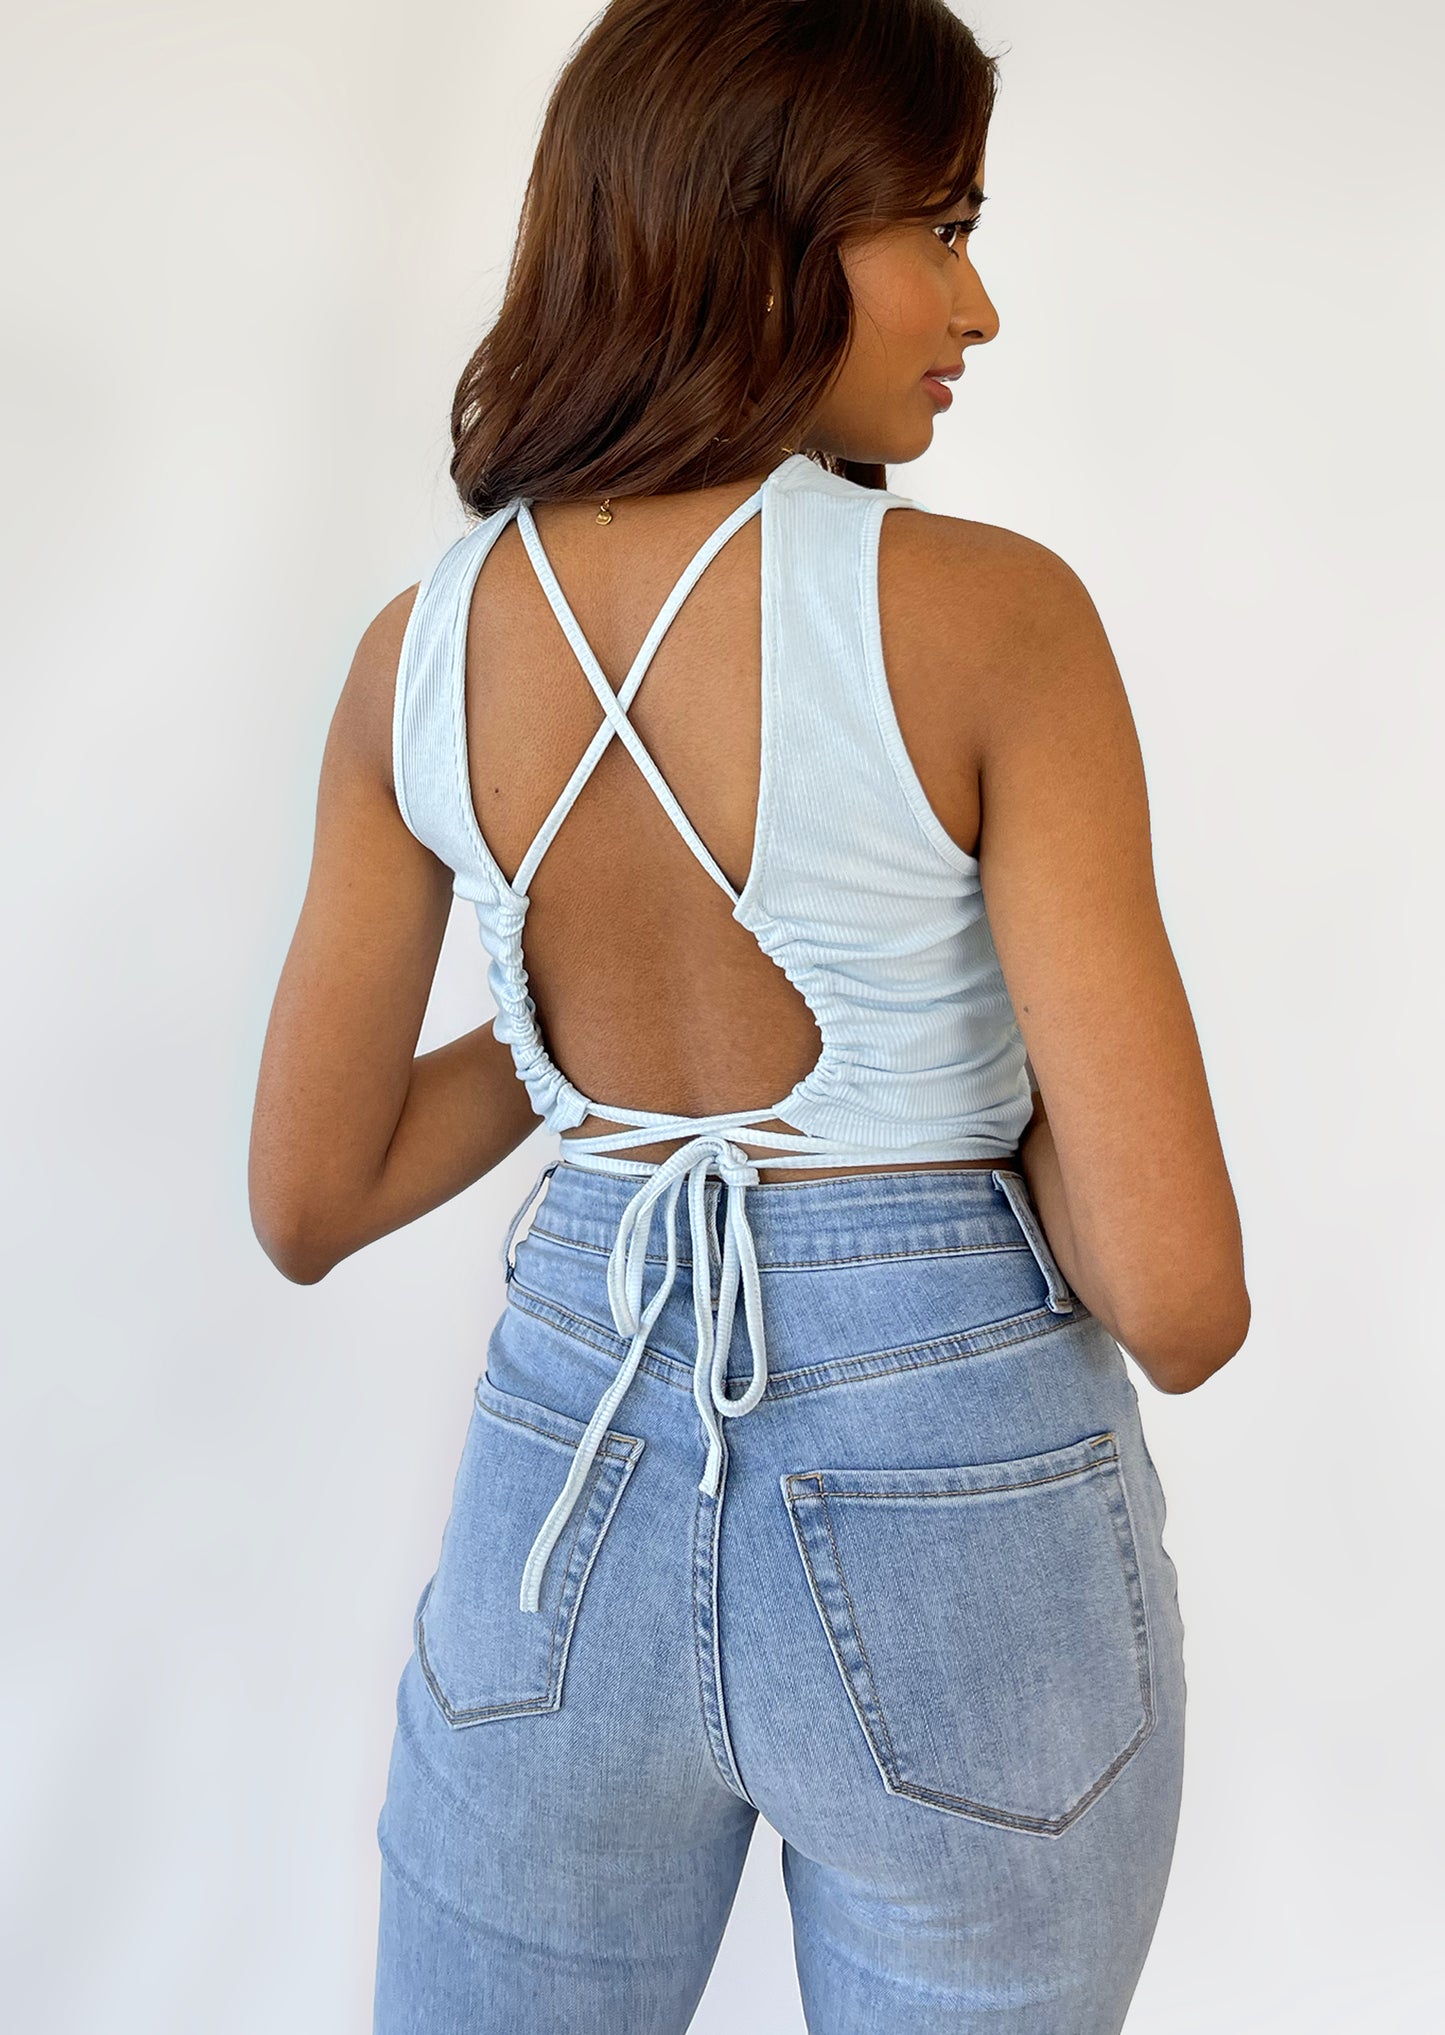 Open back top with cross tie detail in blue